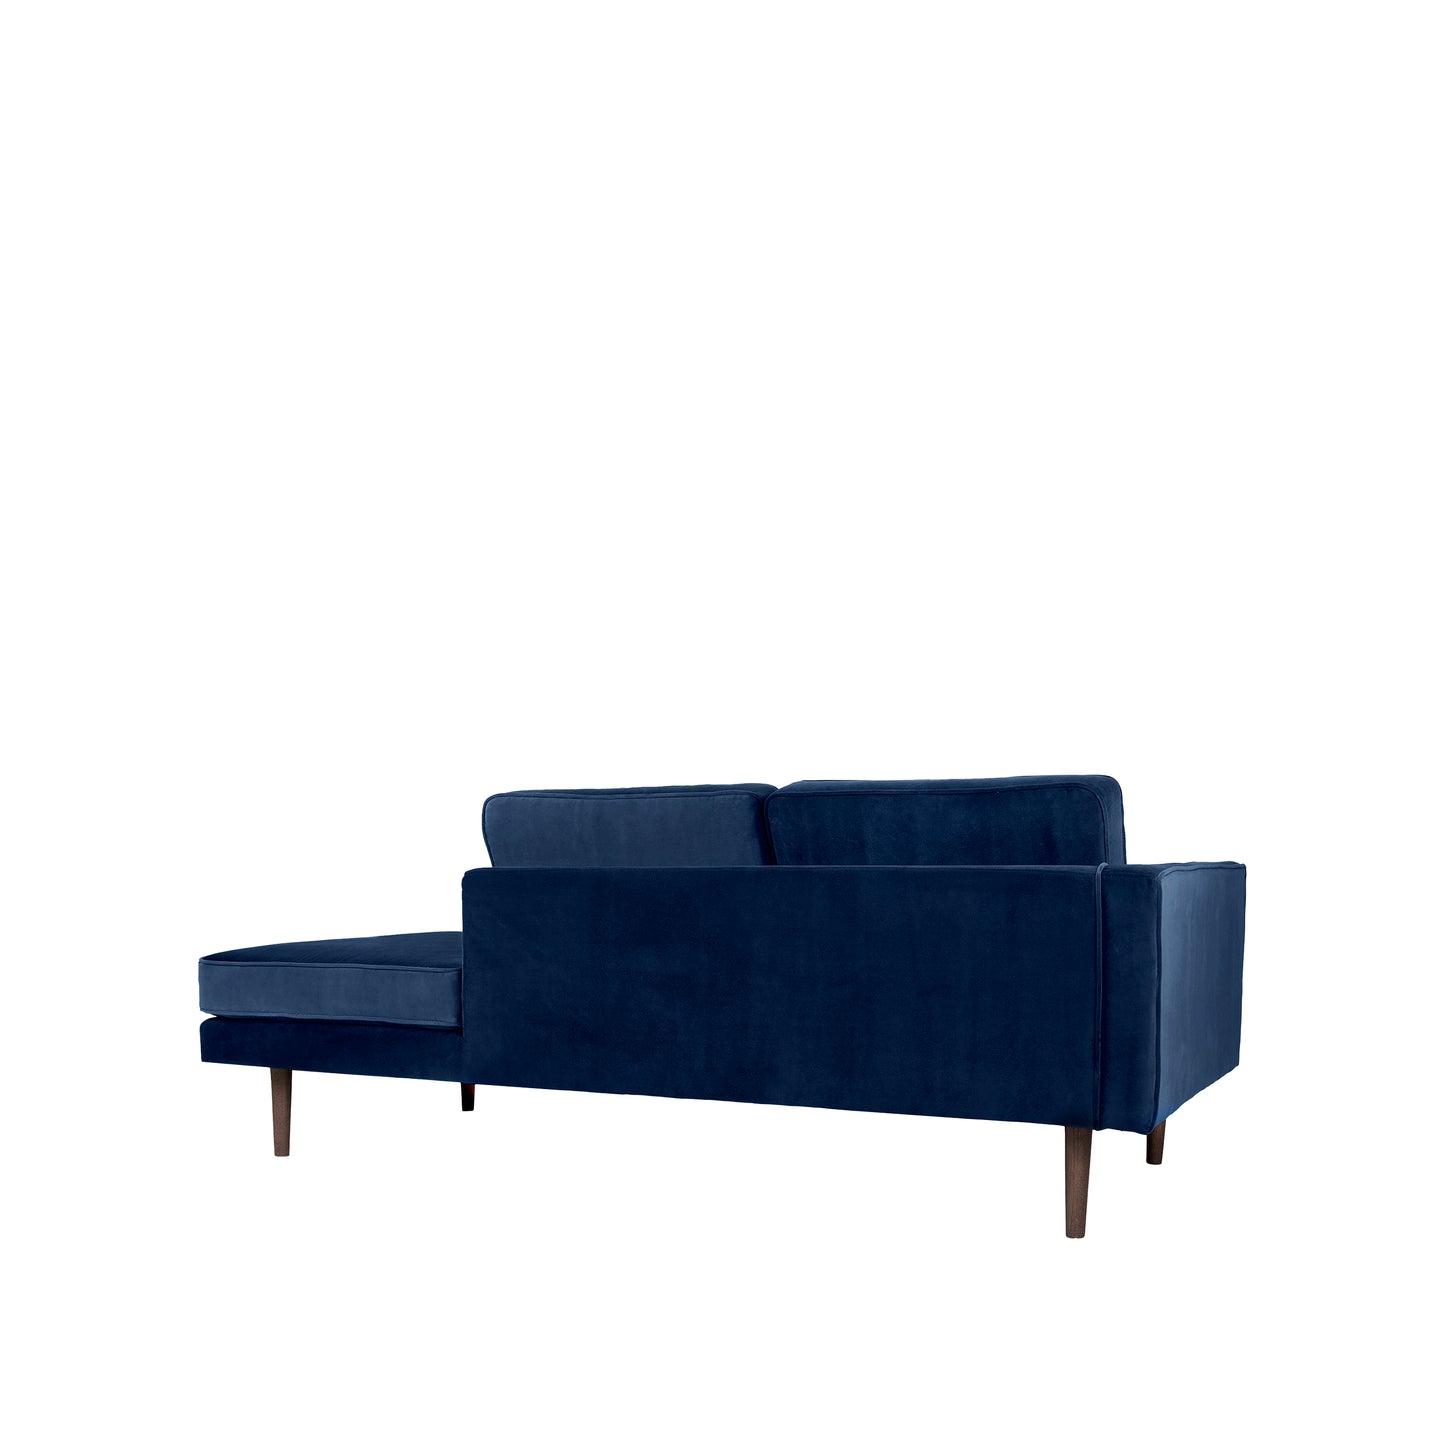 Wind Chaise longue Left Sided-Insignia Blue